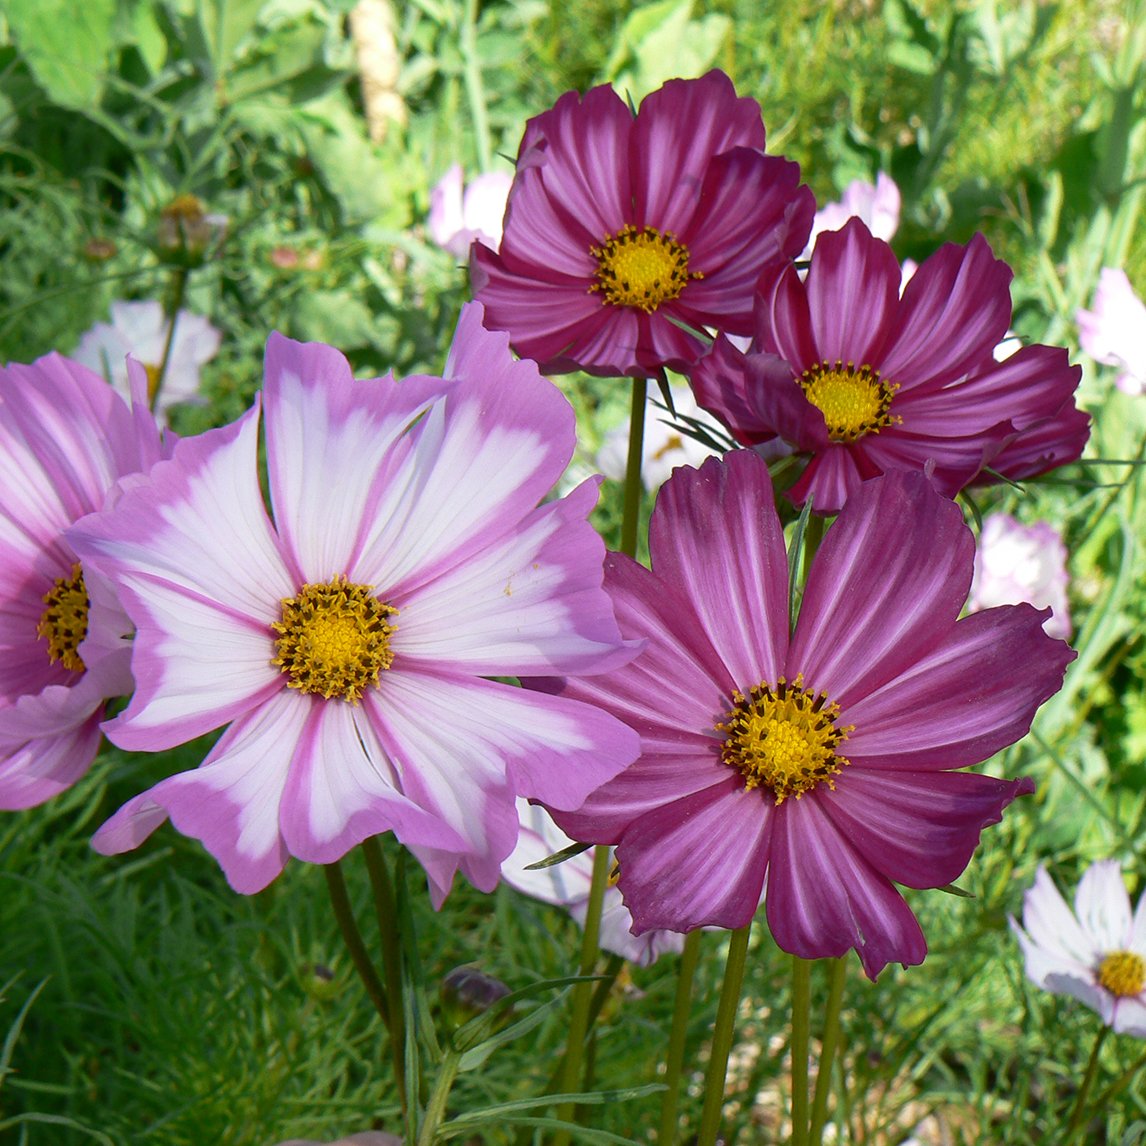 Cosmos 'Picotee' - The Diggers Club